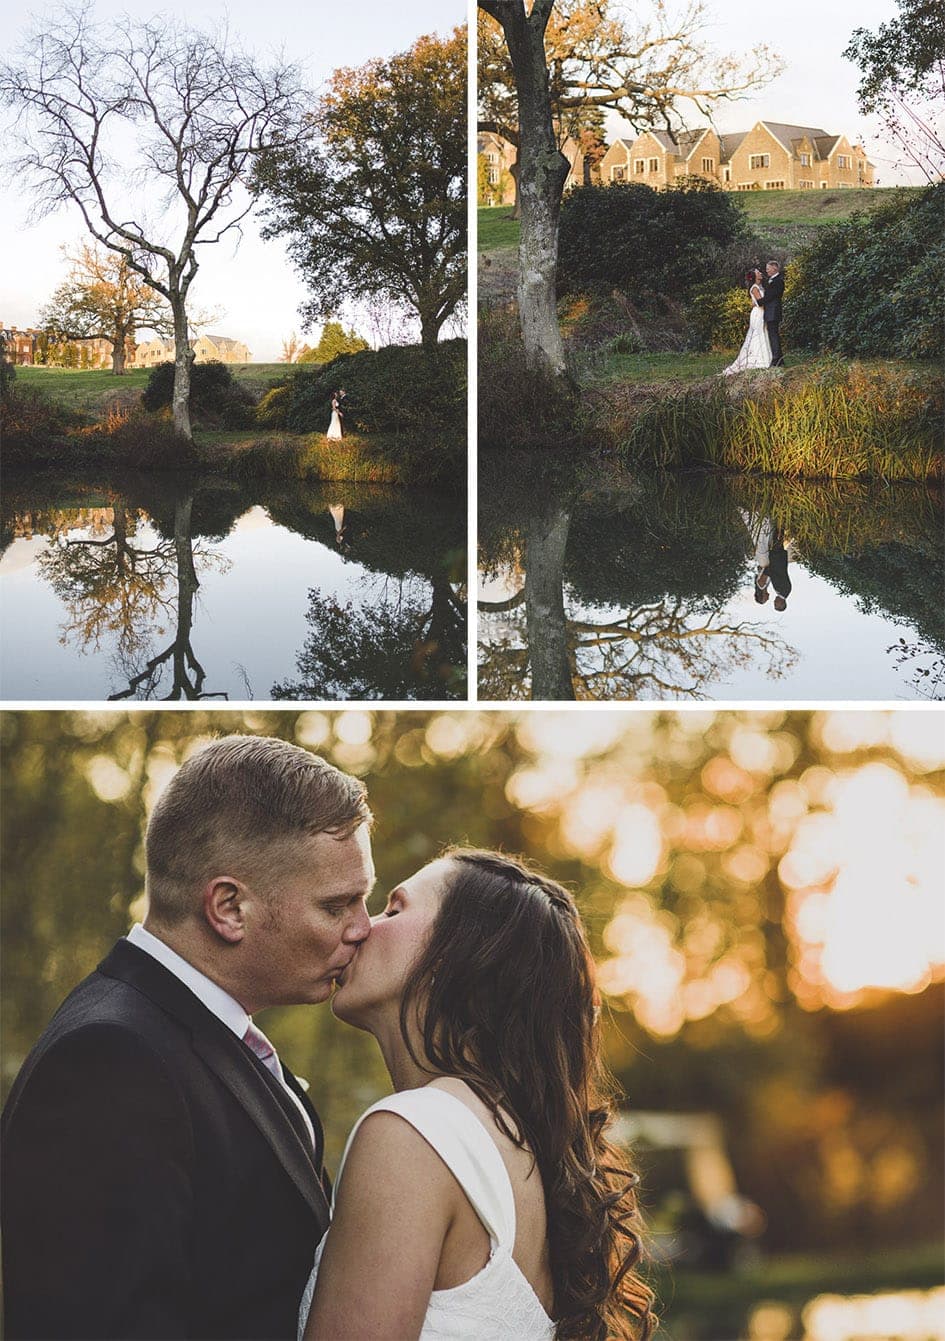 South Lodge Wedding in Sussex with a lovely bride and groom